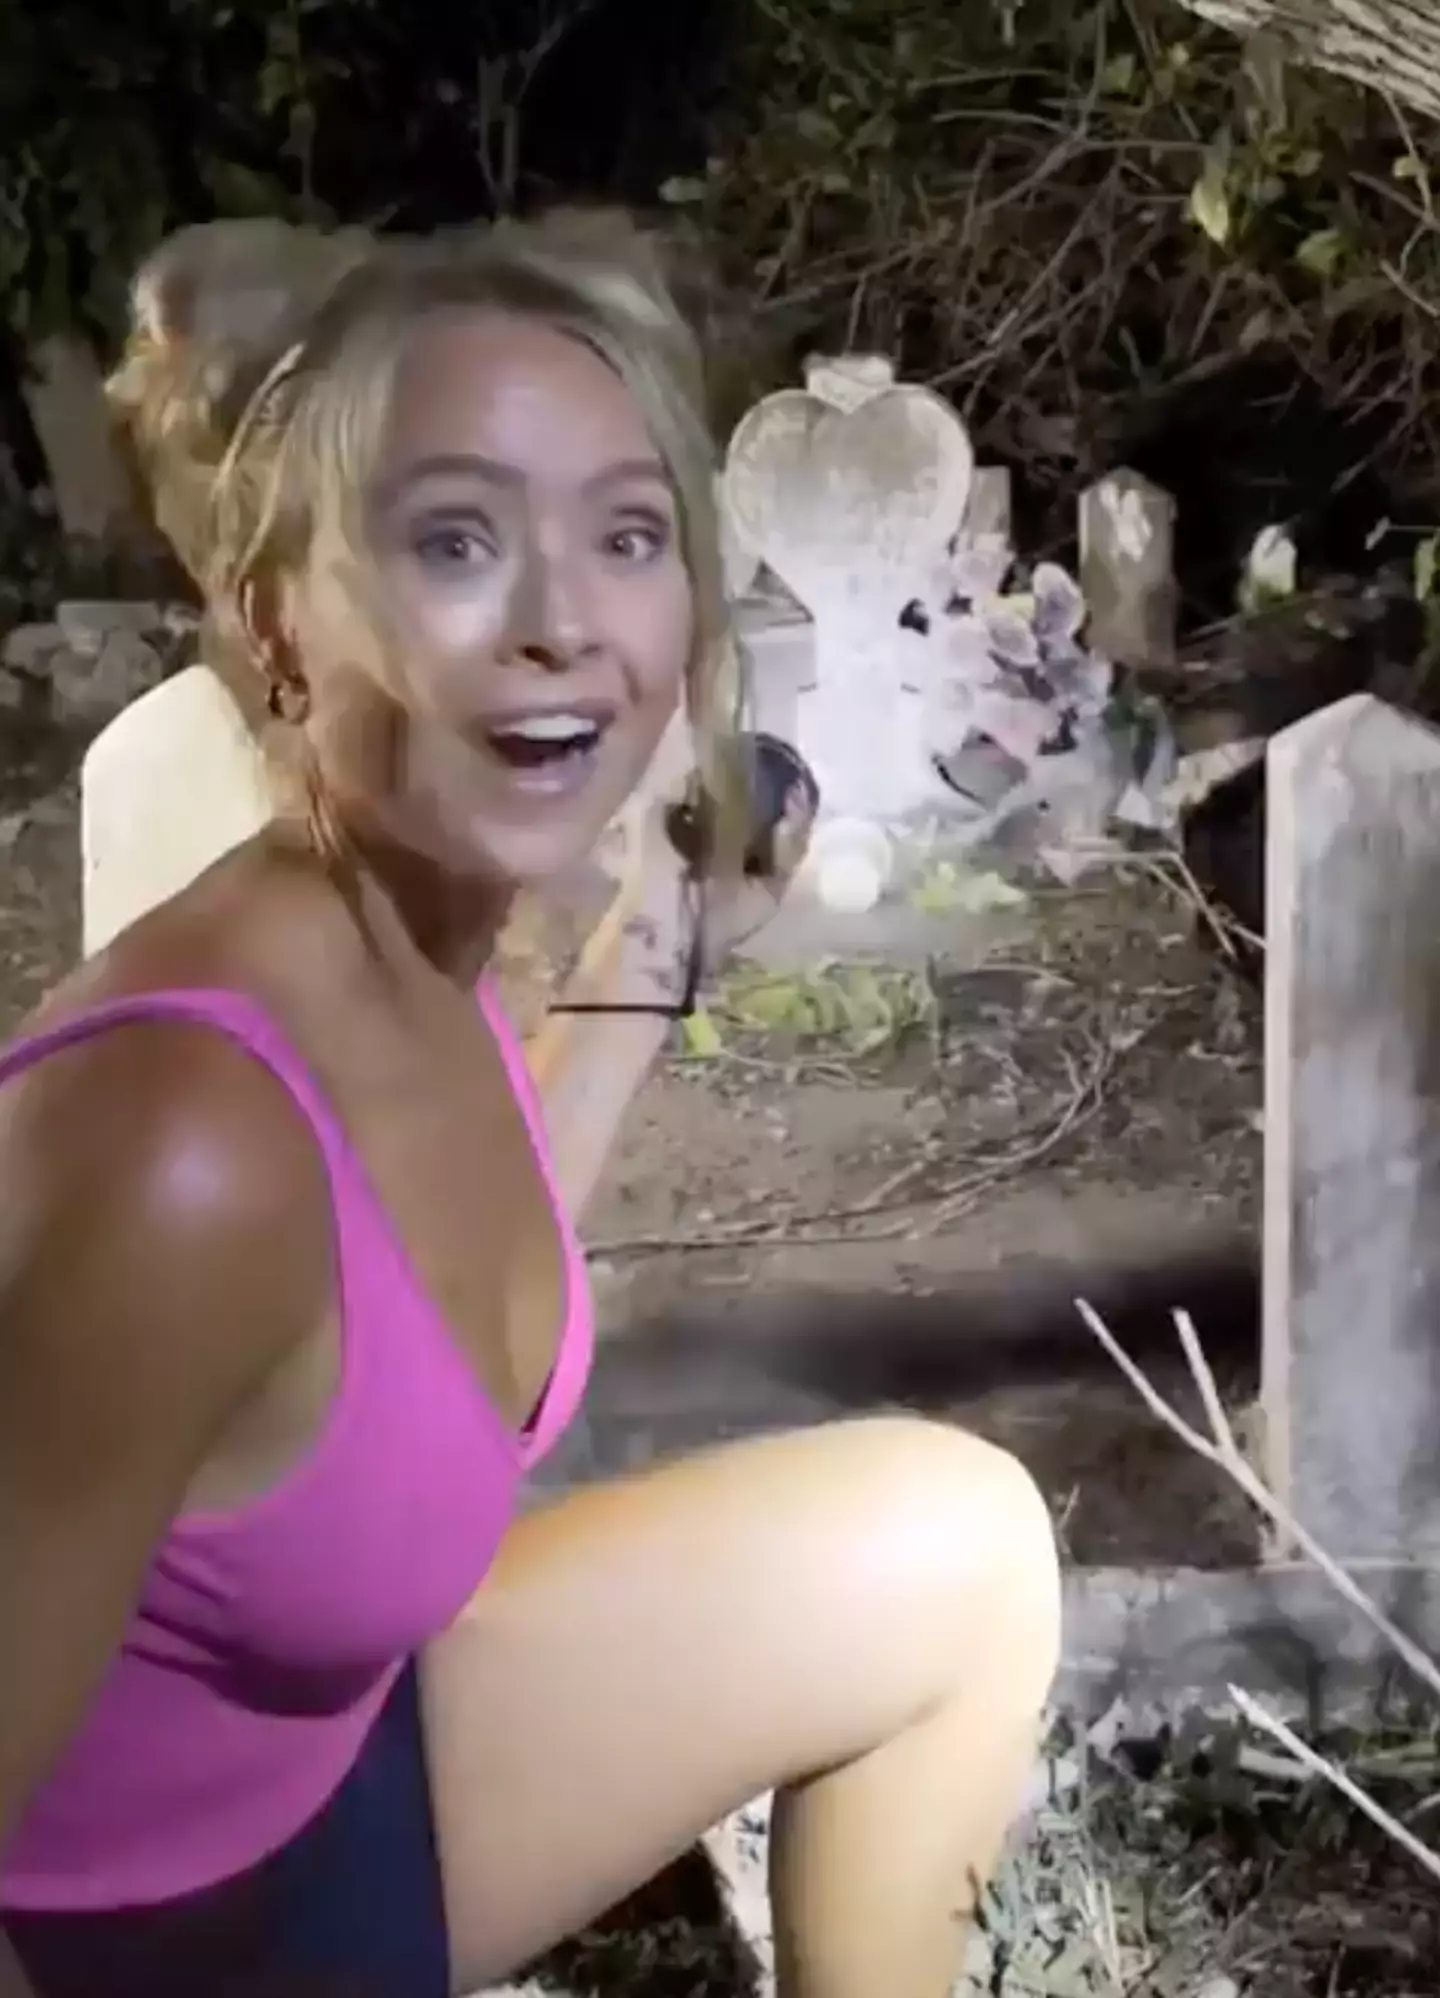 The video featured her cleaning the gravestone.